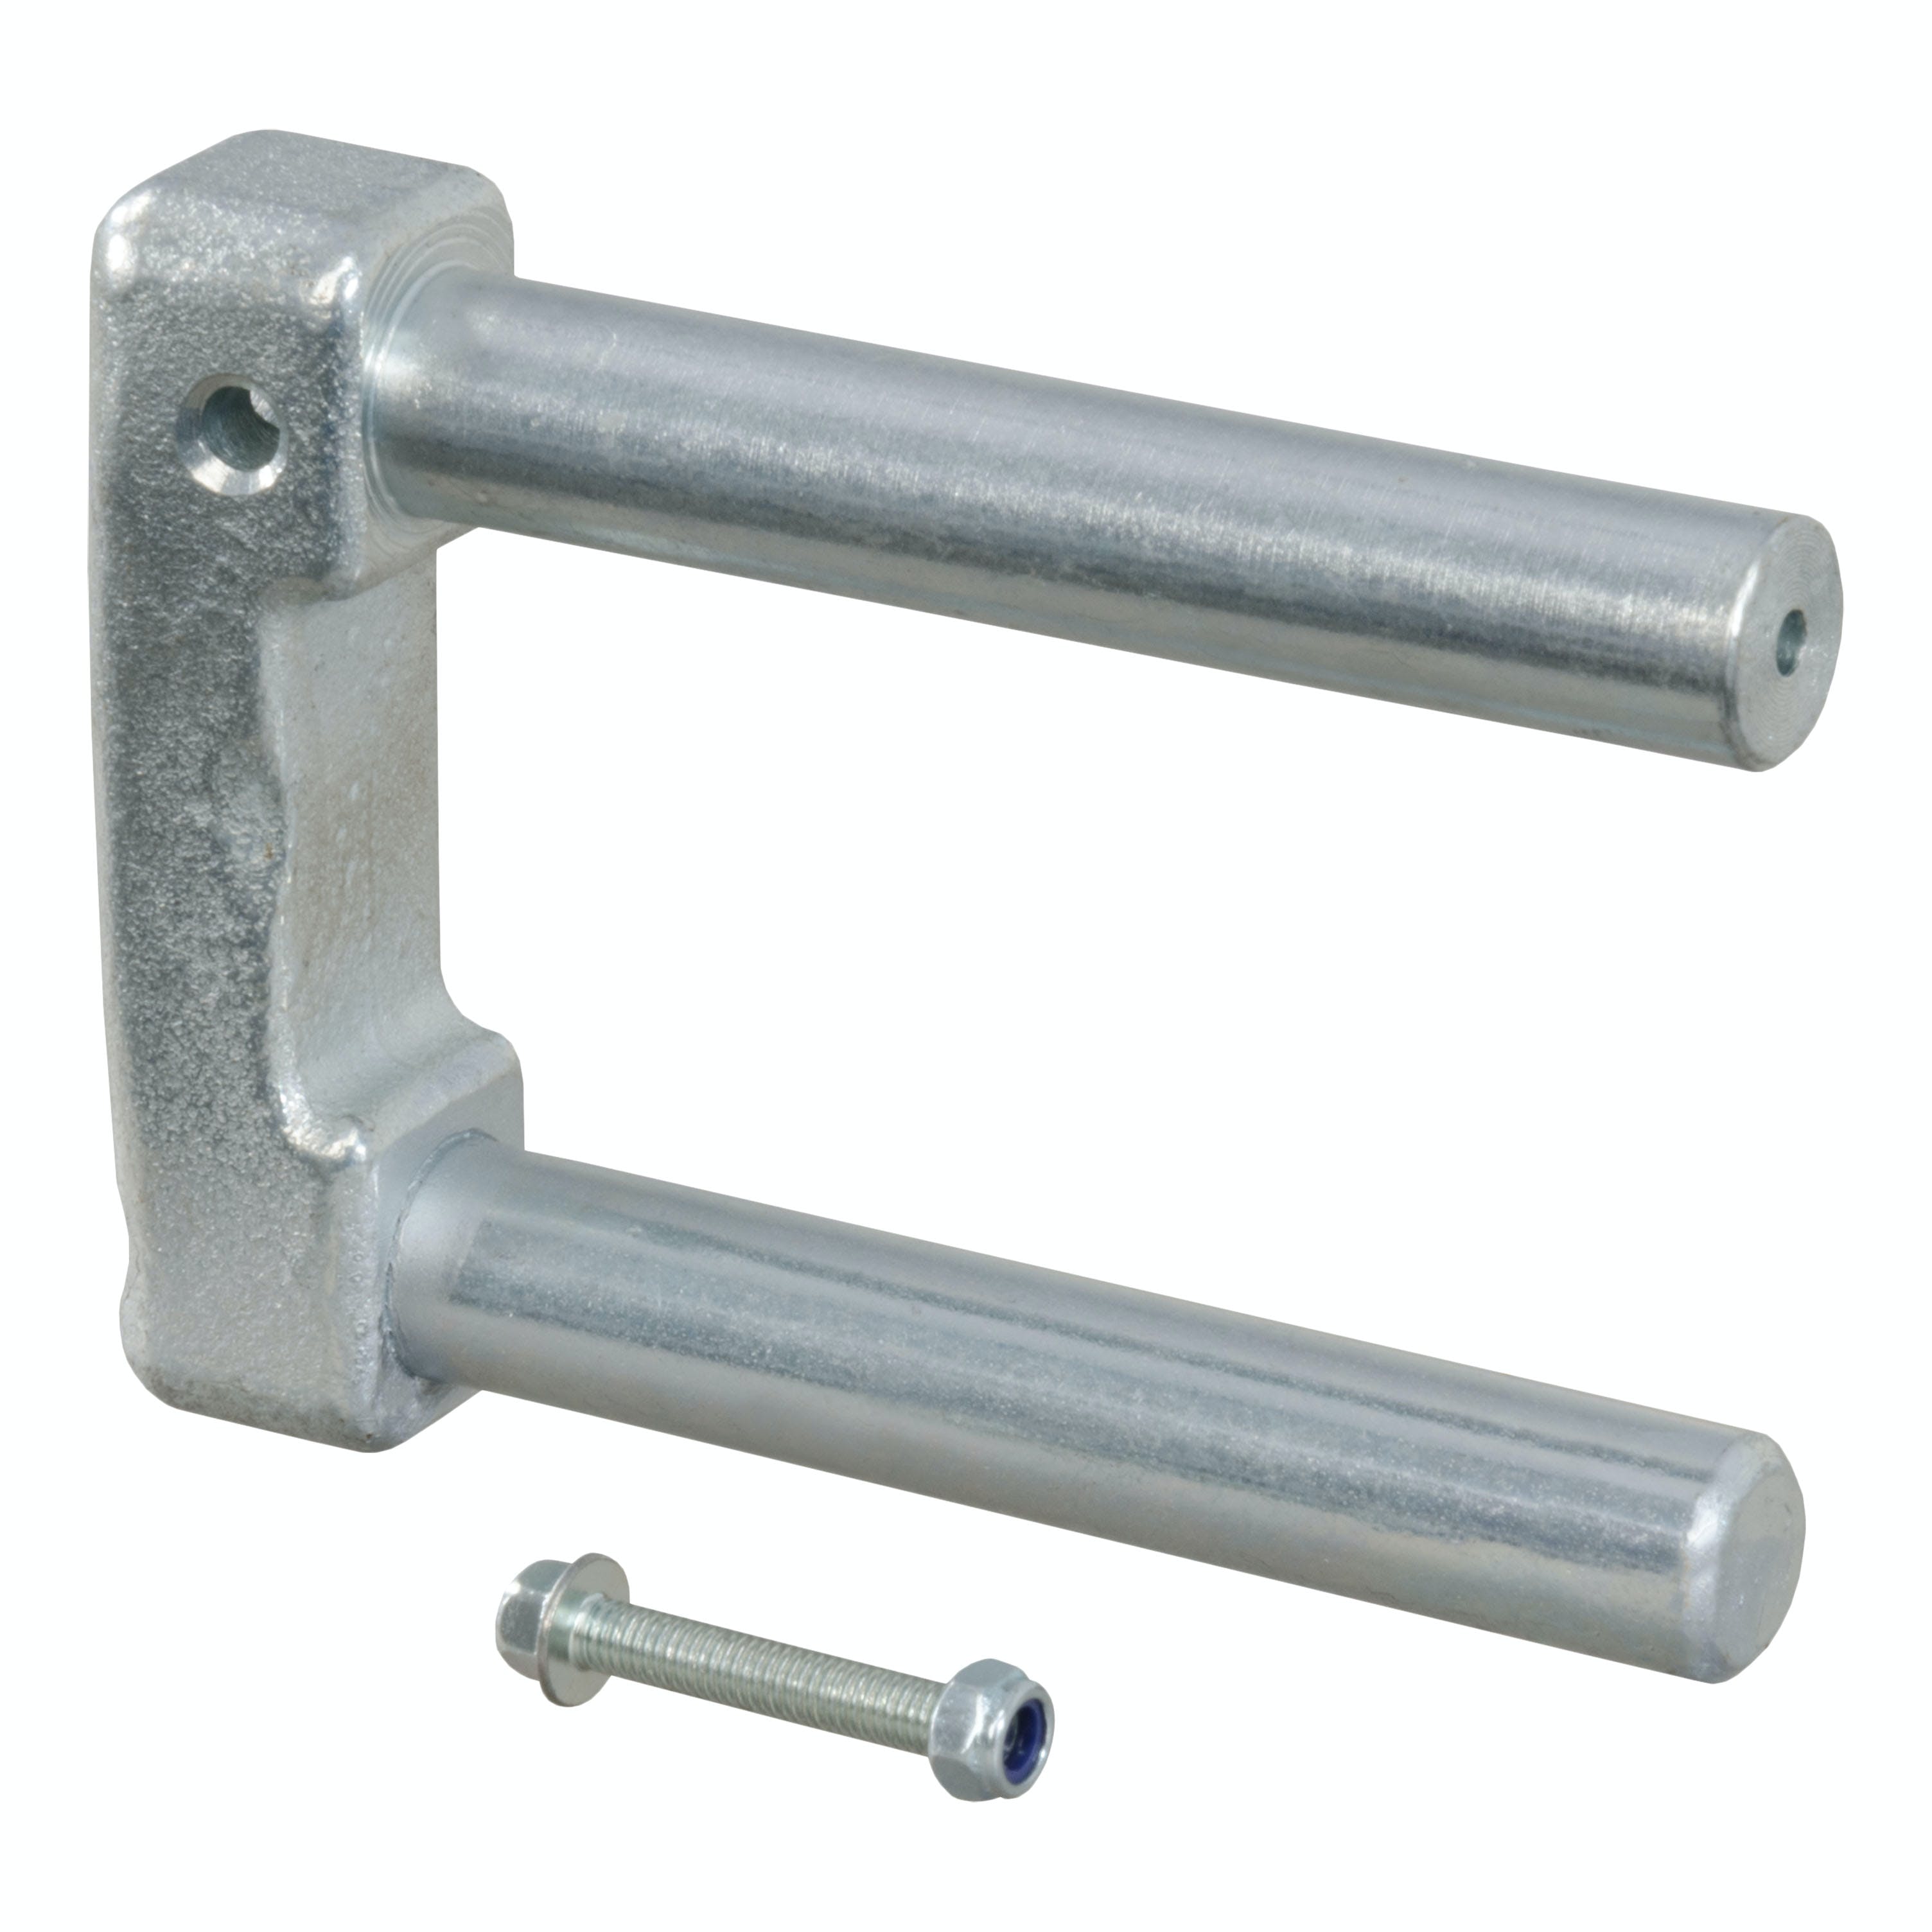 CURT 19258 Replacement Double Lock and EZr Gooseneck Locking Pin